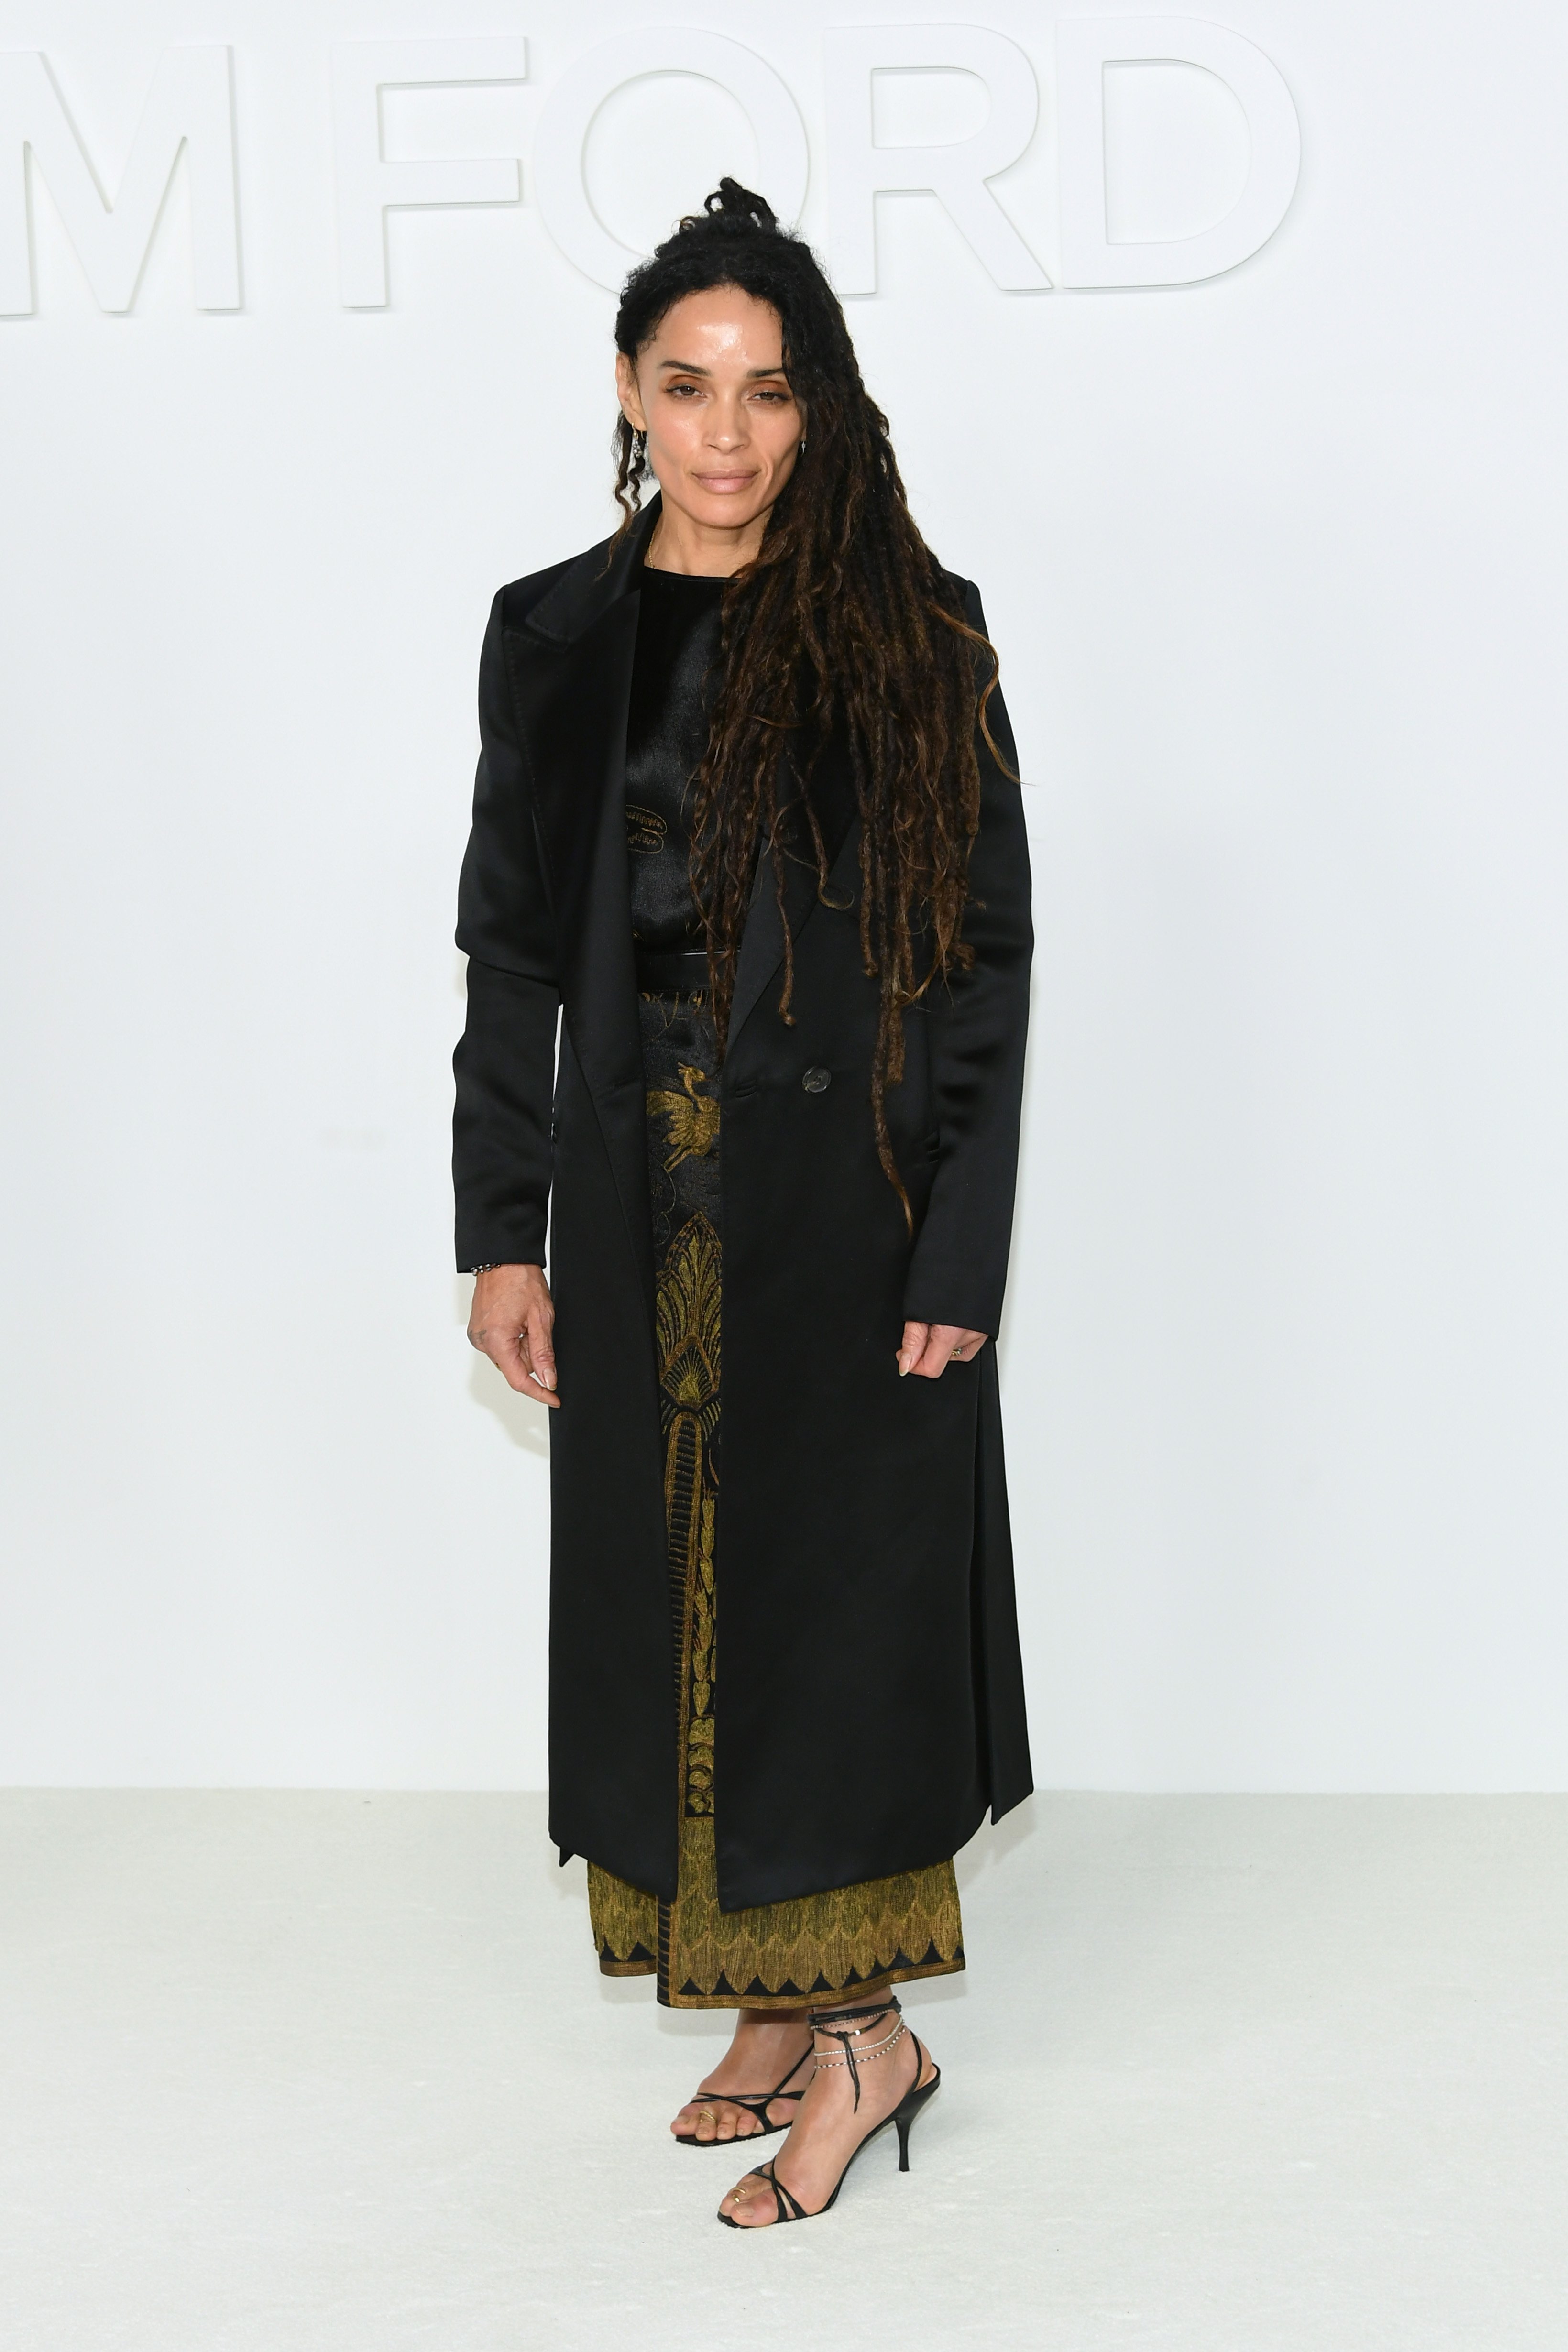 Lisa Bonet posed for a picture in California on February 7, 2020 | Source: Getty Images 